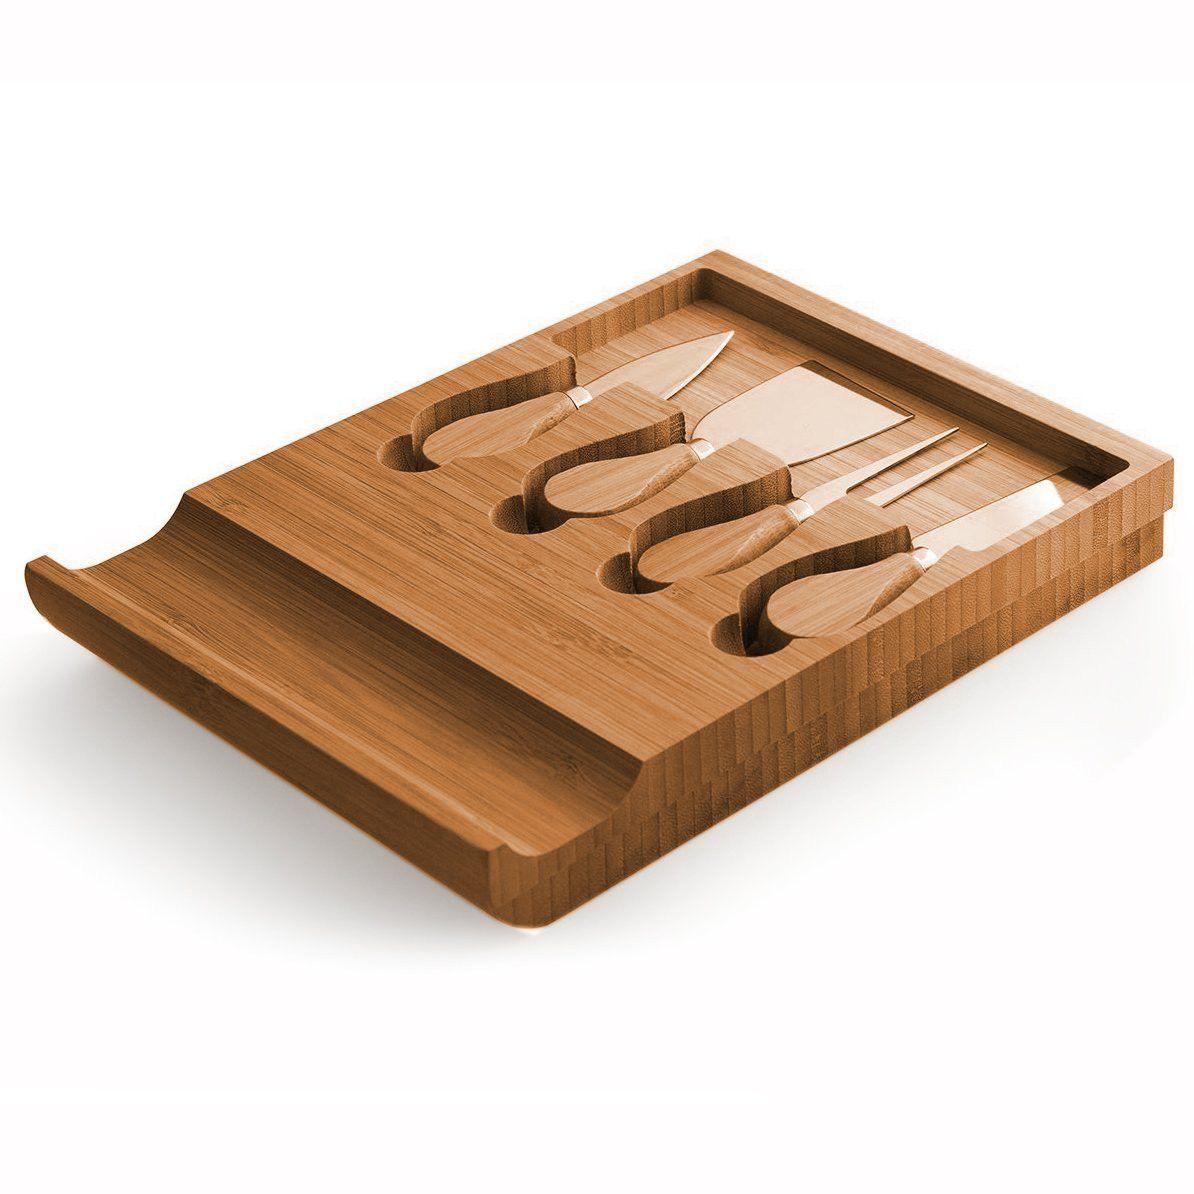 Bamboo cheese serving board with knives